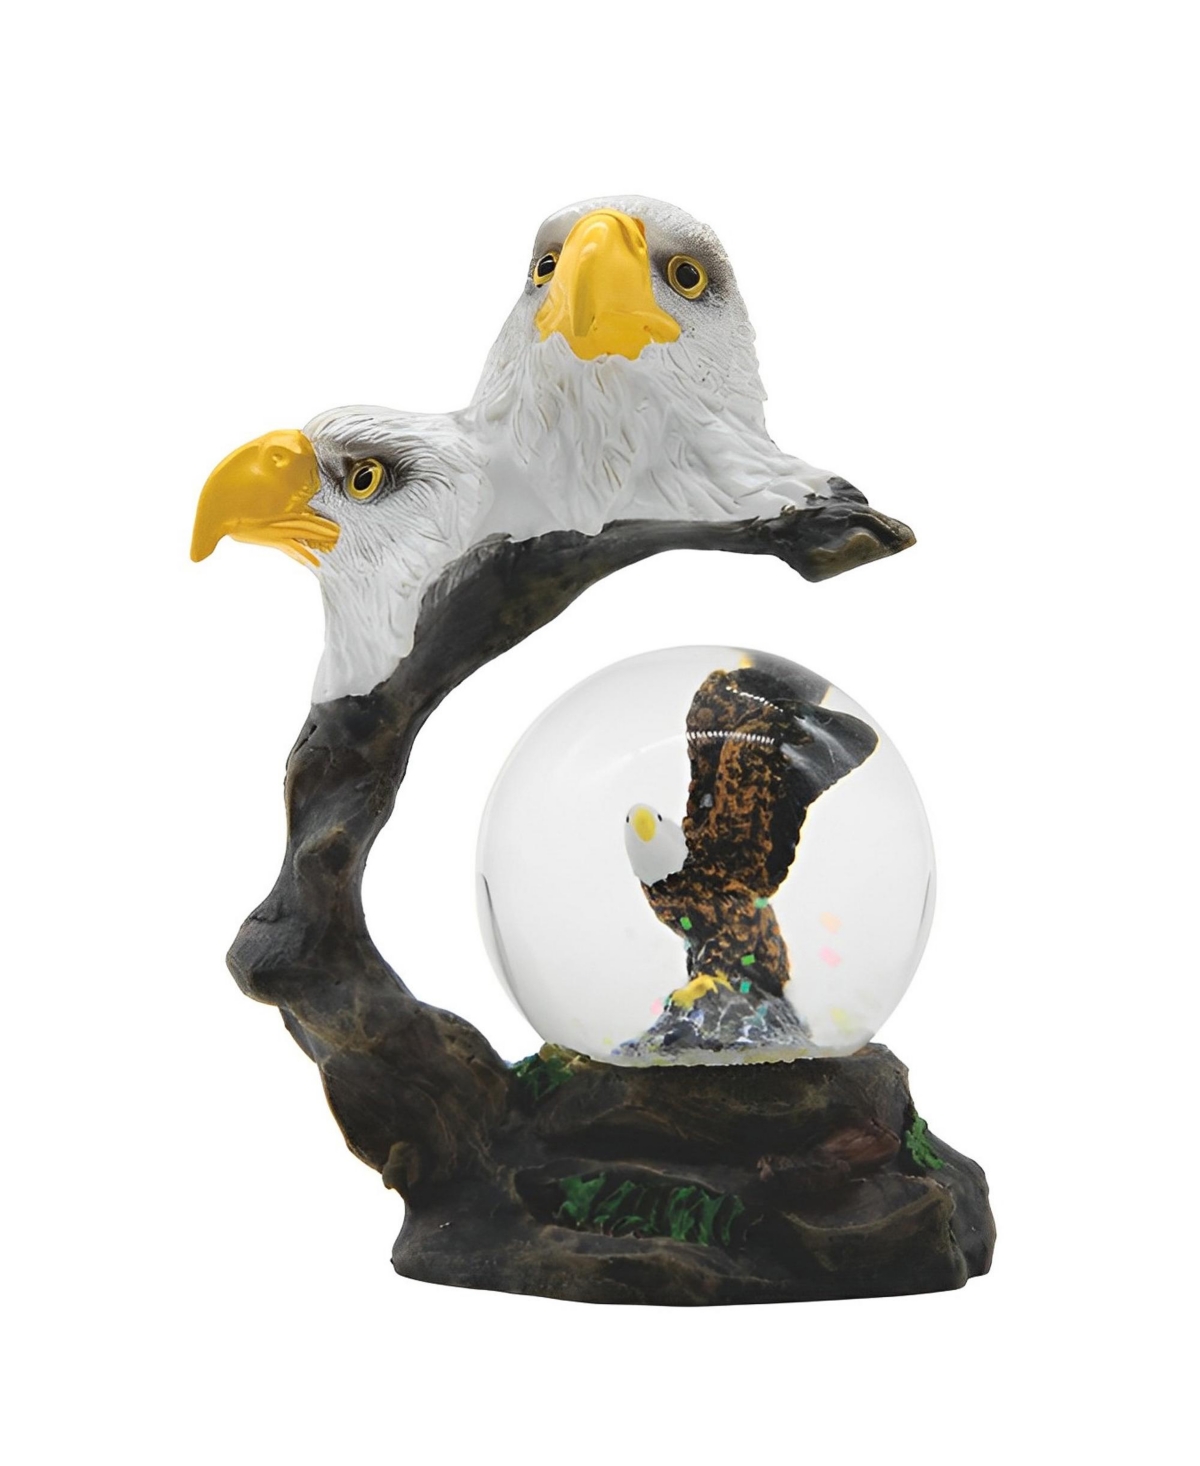 4.25"H Eagle Glitter Snow Globe Figurine Home Decor Perfect Gift for House Warming, Holidays and Birthdays - Multicolor